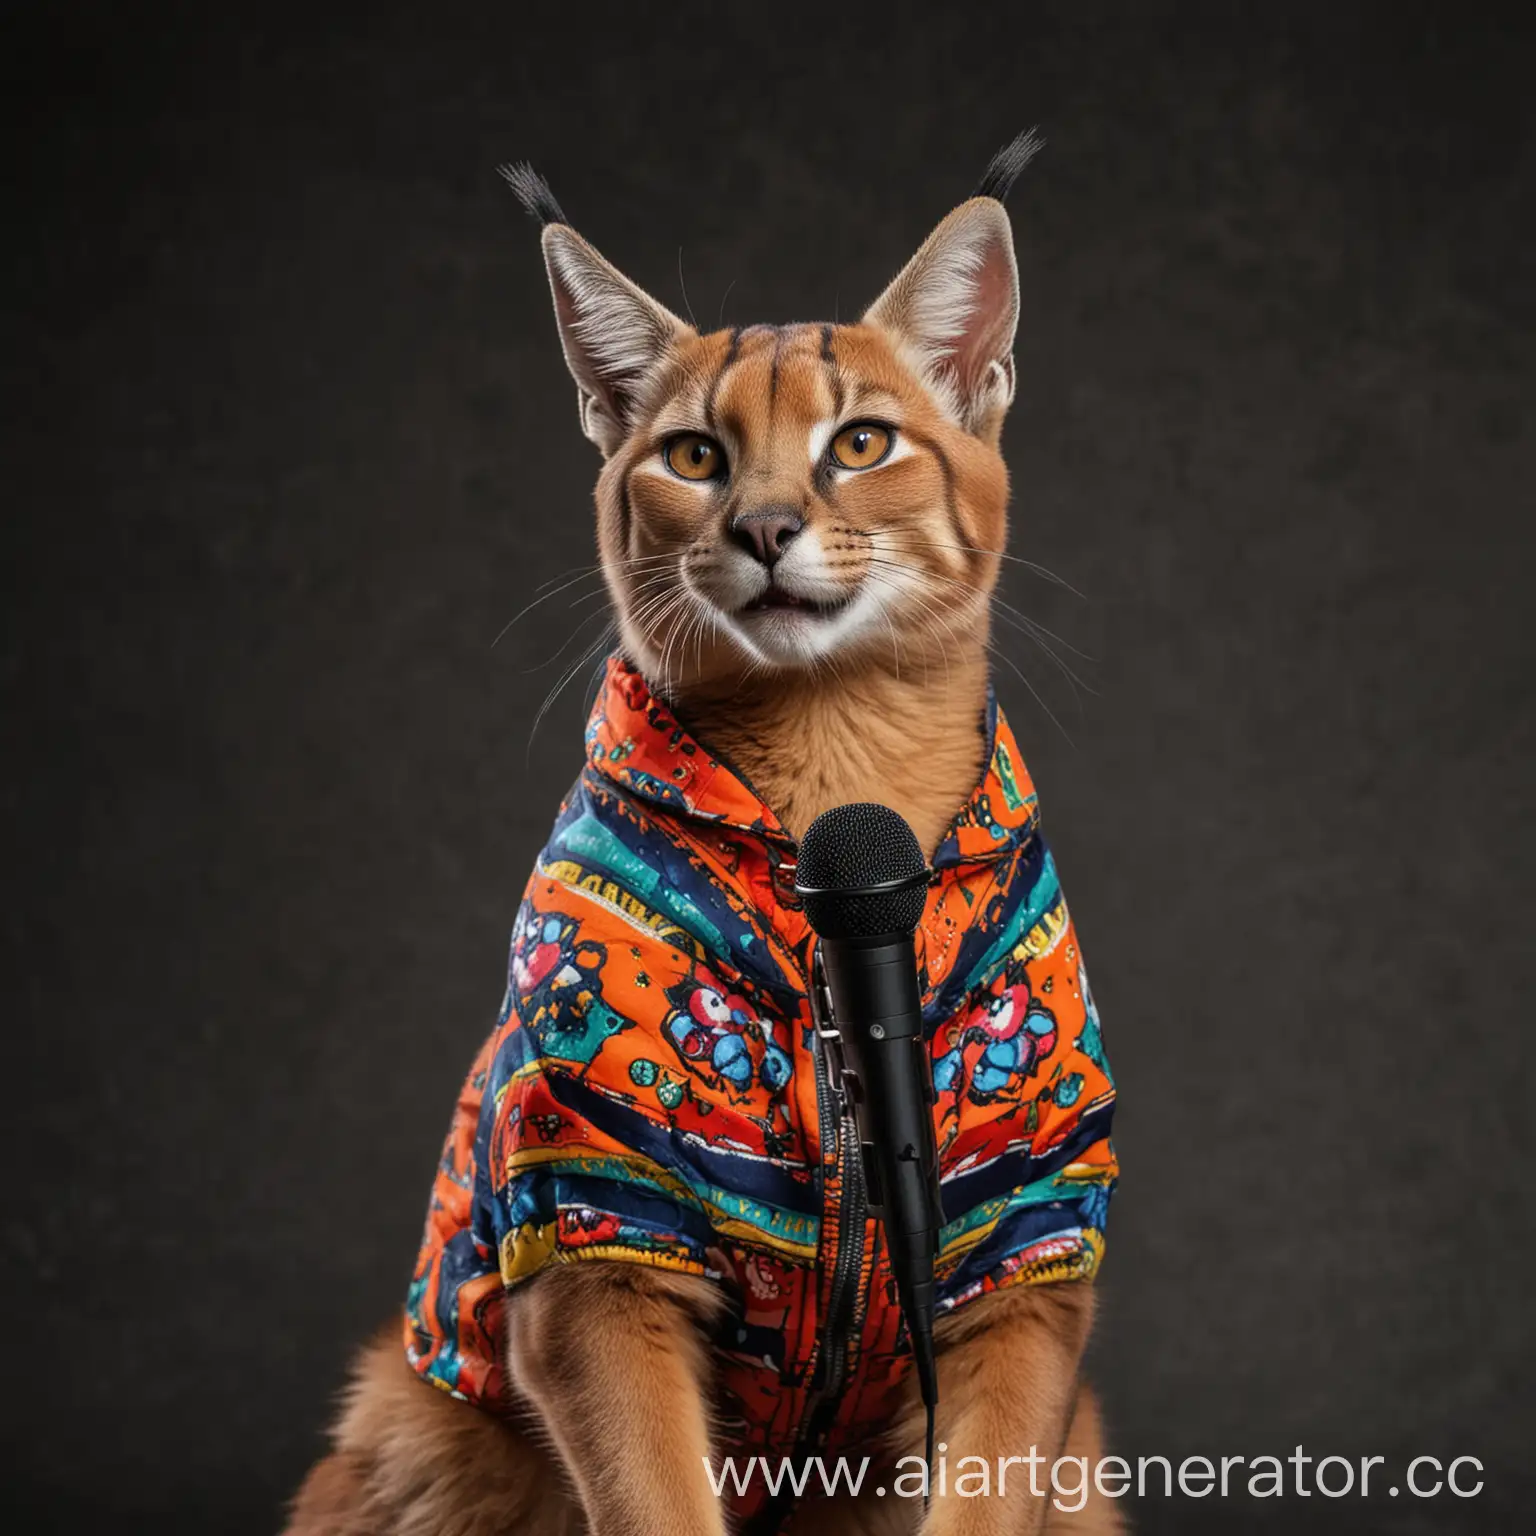 Colorful-JacketWearing-Caracal-Speaking-into-Microphone